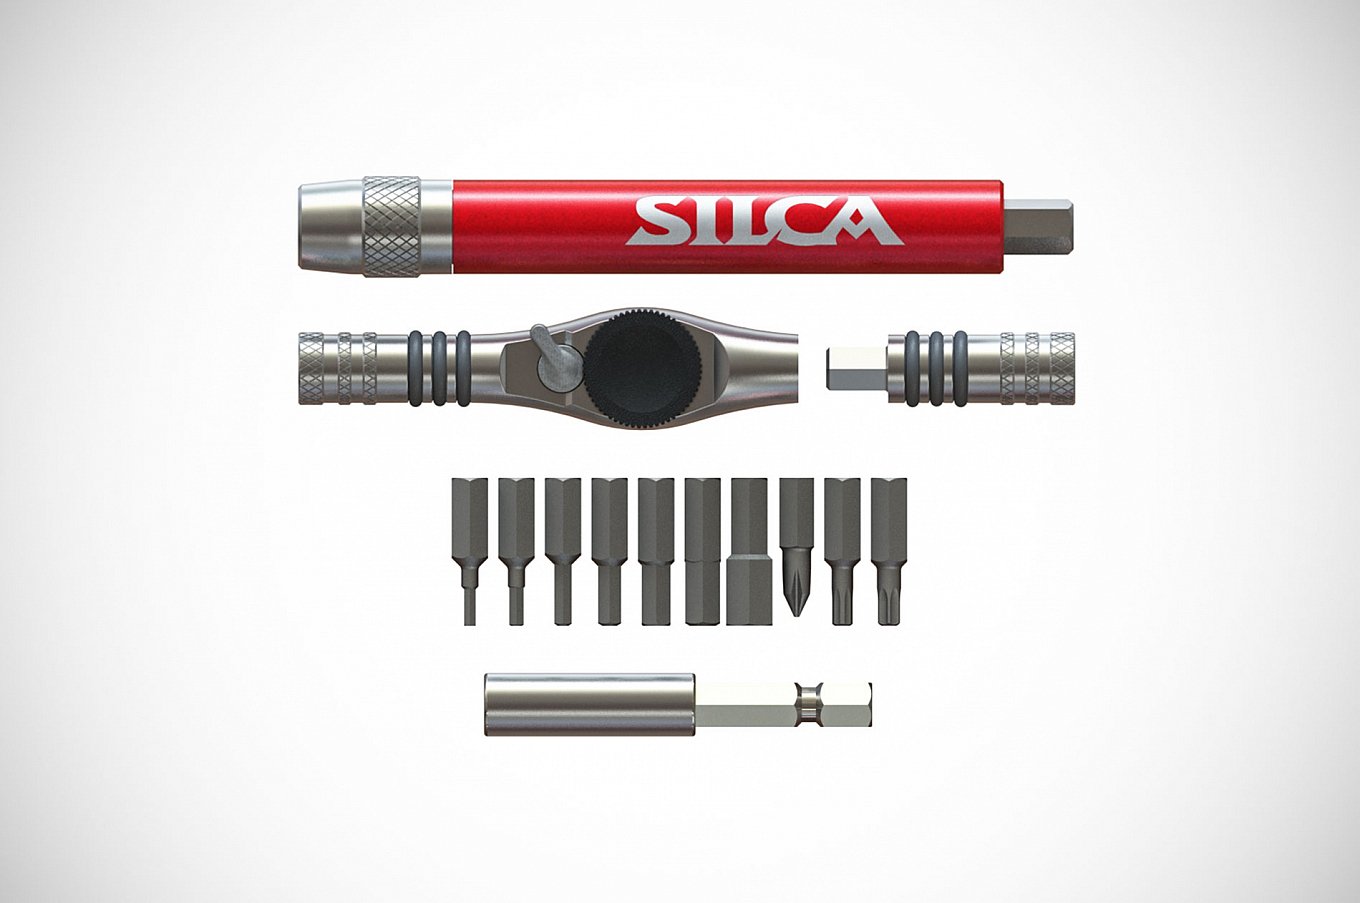 t-ratchet-and-ti-torque-tool-by-silca-1